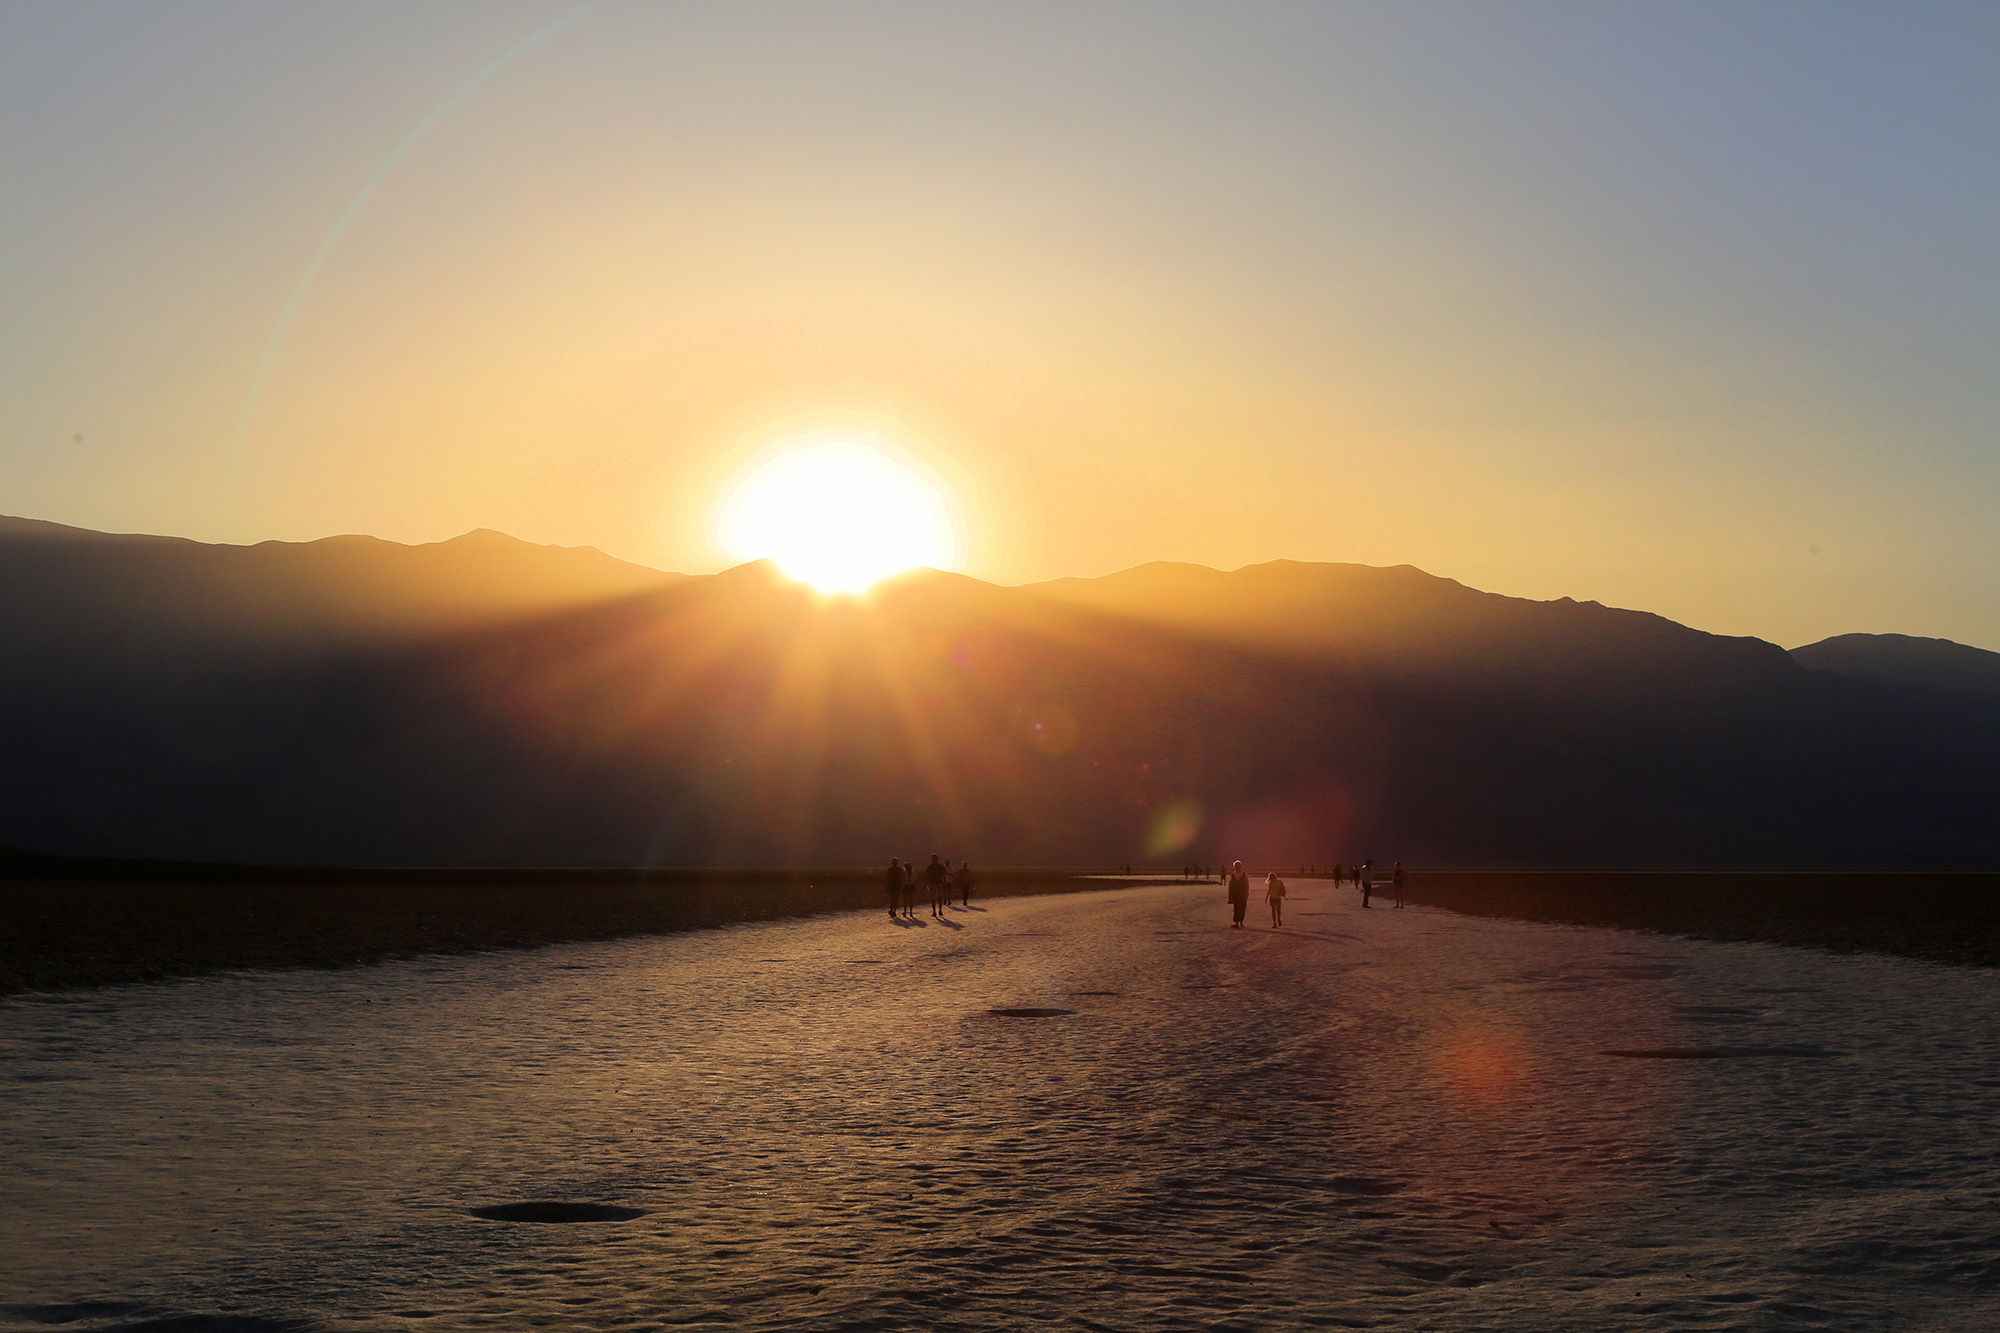 Sunset against the mountains at Badwater Basin in Death Valley National Park.